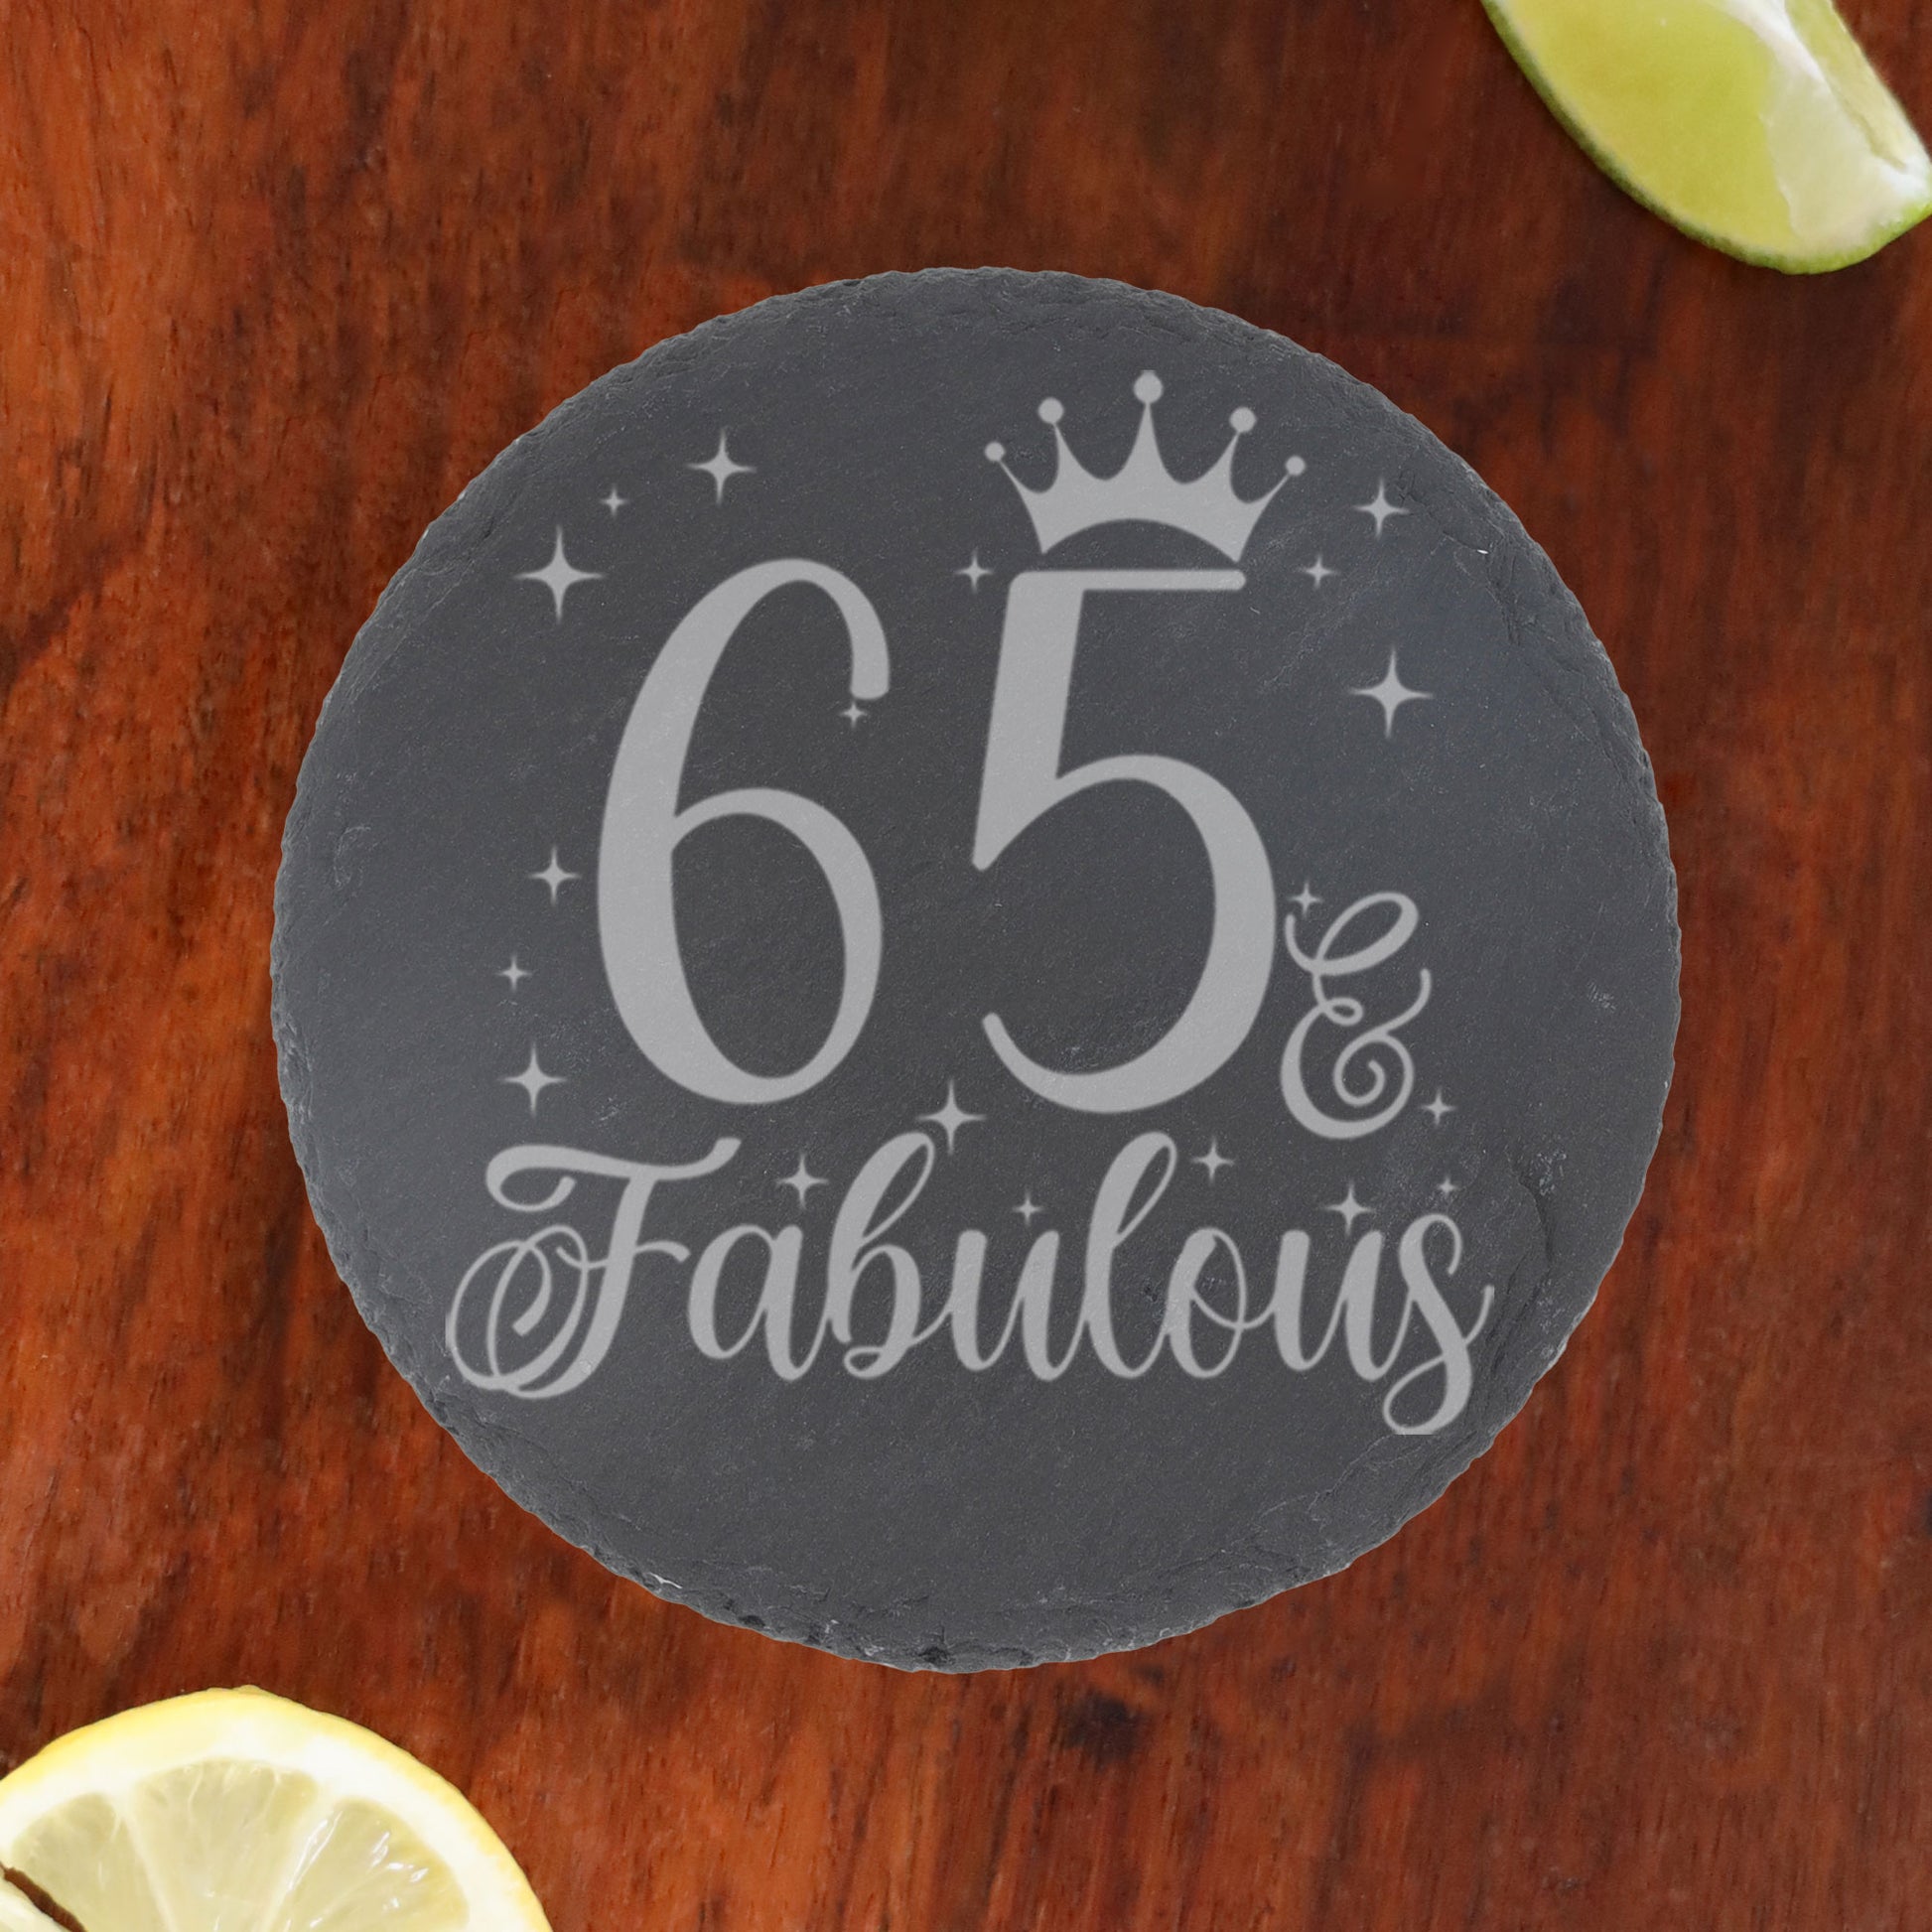 65 & Fabulous 65th Birthday Gift Engraved Wine Glass and/or Coaster Set  - Always Looking Good - Round Coaster Only  